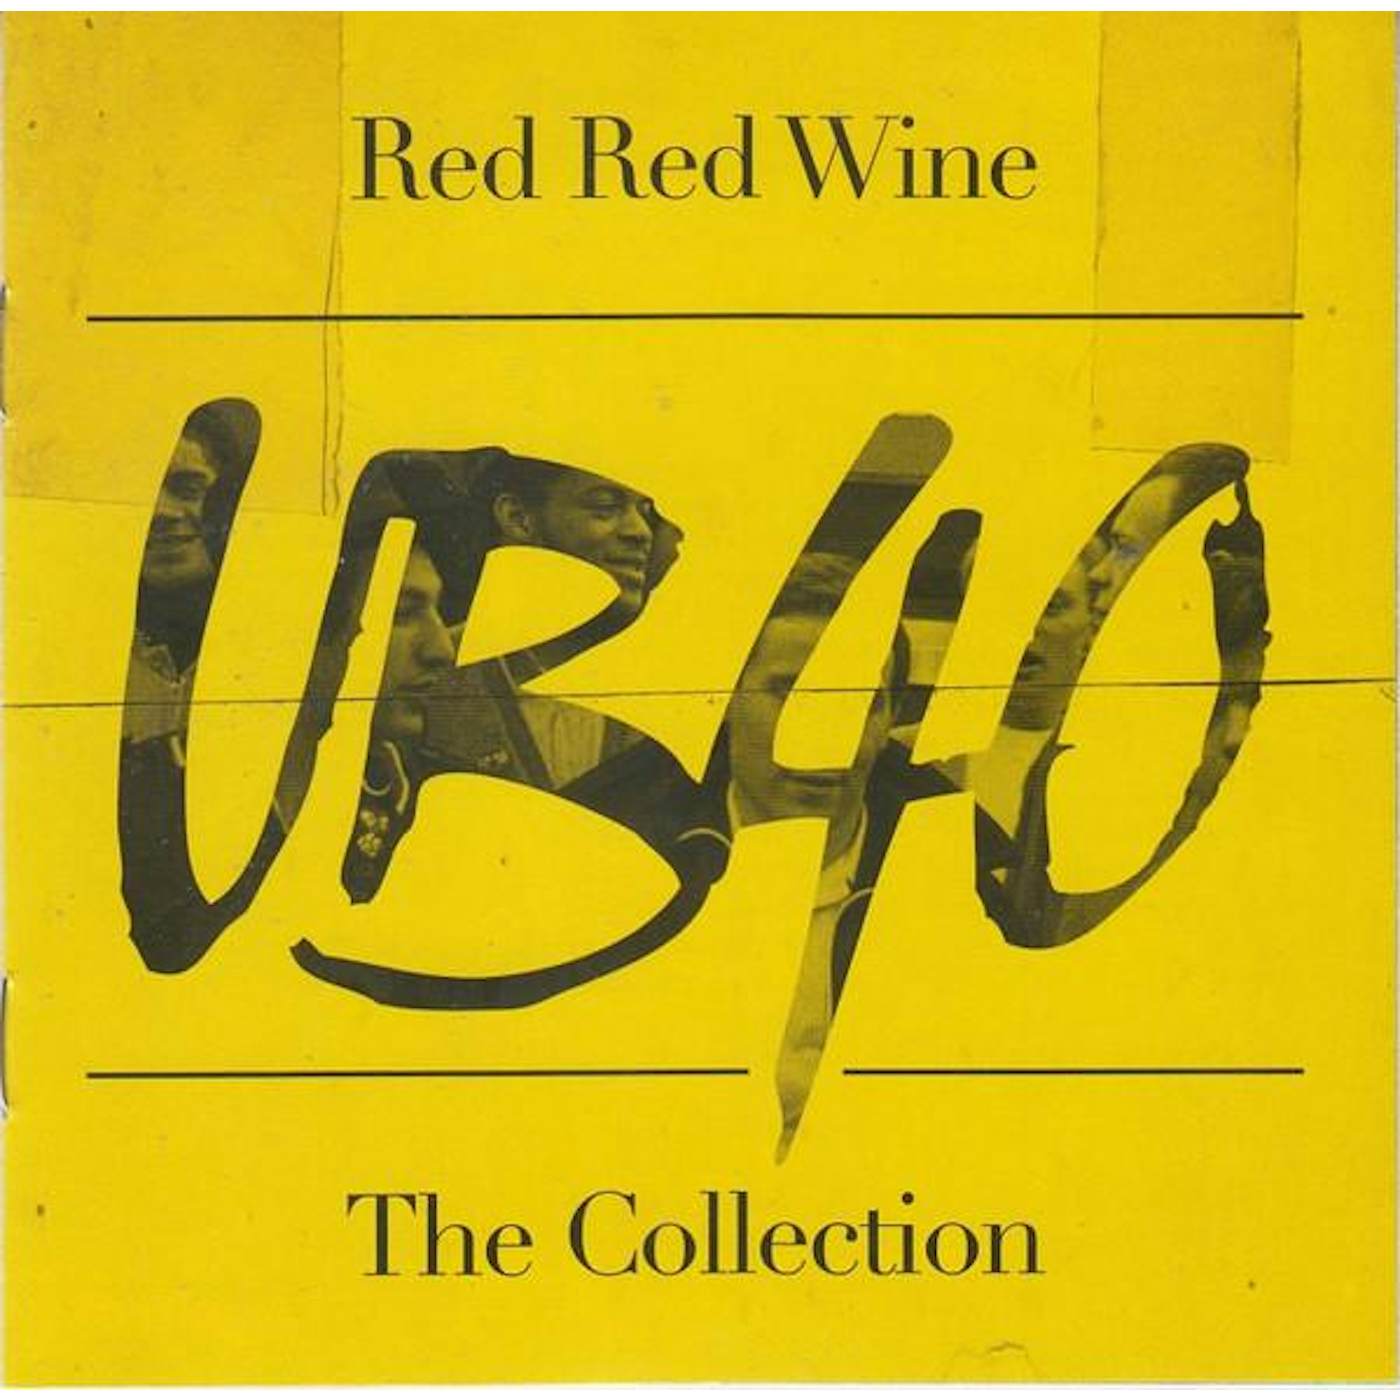 UB40 RED RED WINE: THE COLLECTION CD